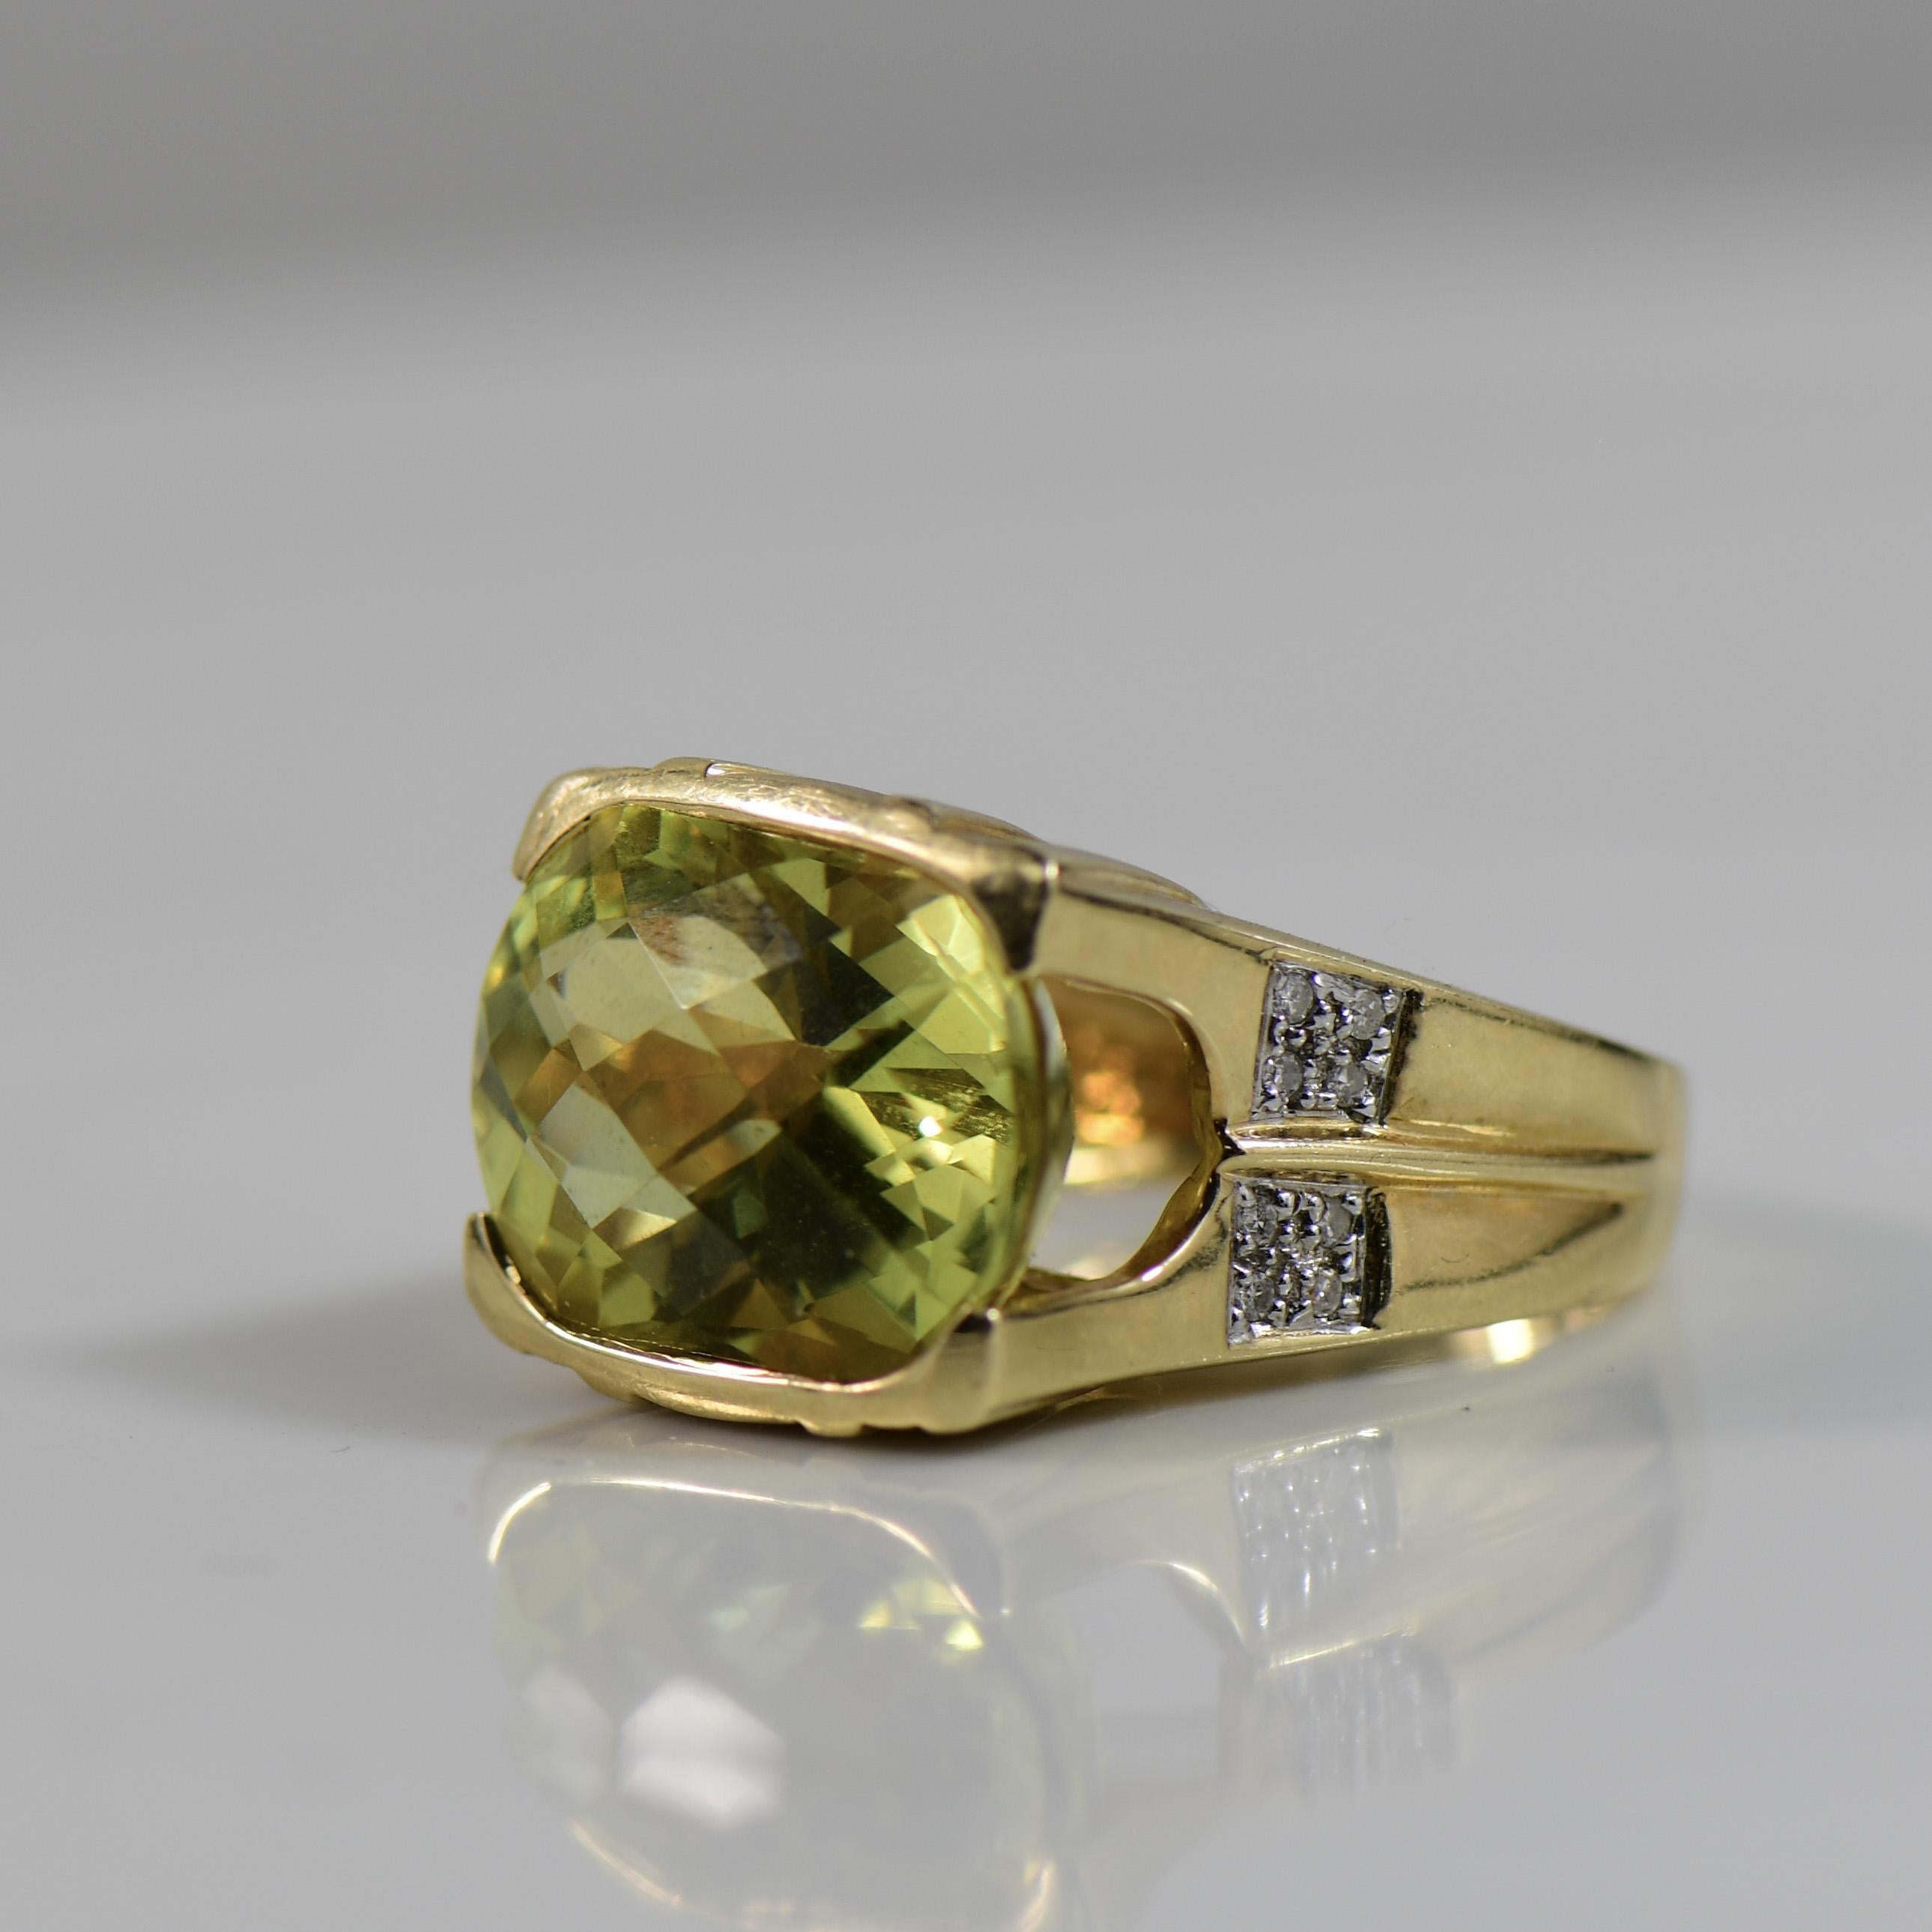 Experience contemporary luxury with this extraordinary checkerboard oval-cut yellow-green citrine, weighing an impressive 15.5 carats. The mesmerizing facets of the citrine create a radiant play of light, showcasing its vibrant and unique